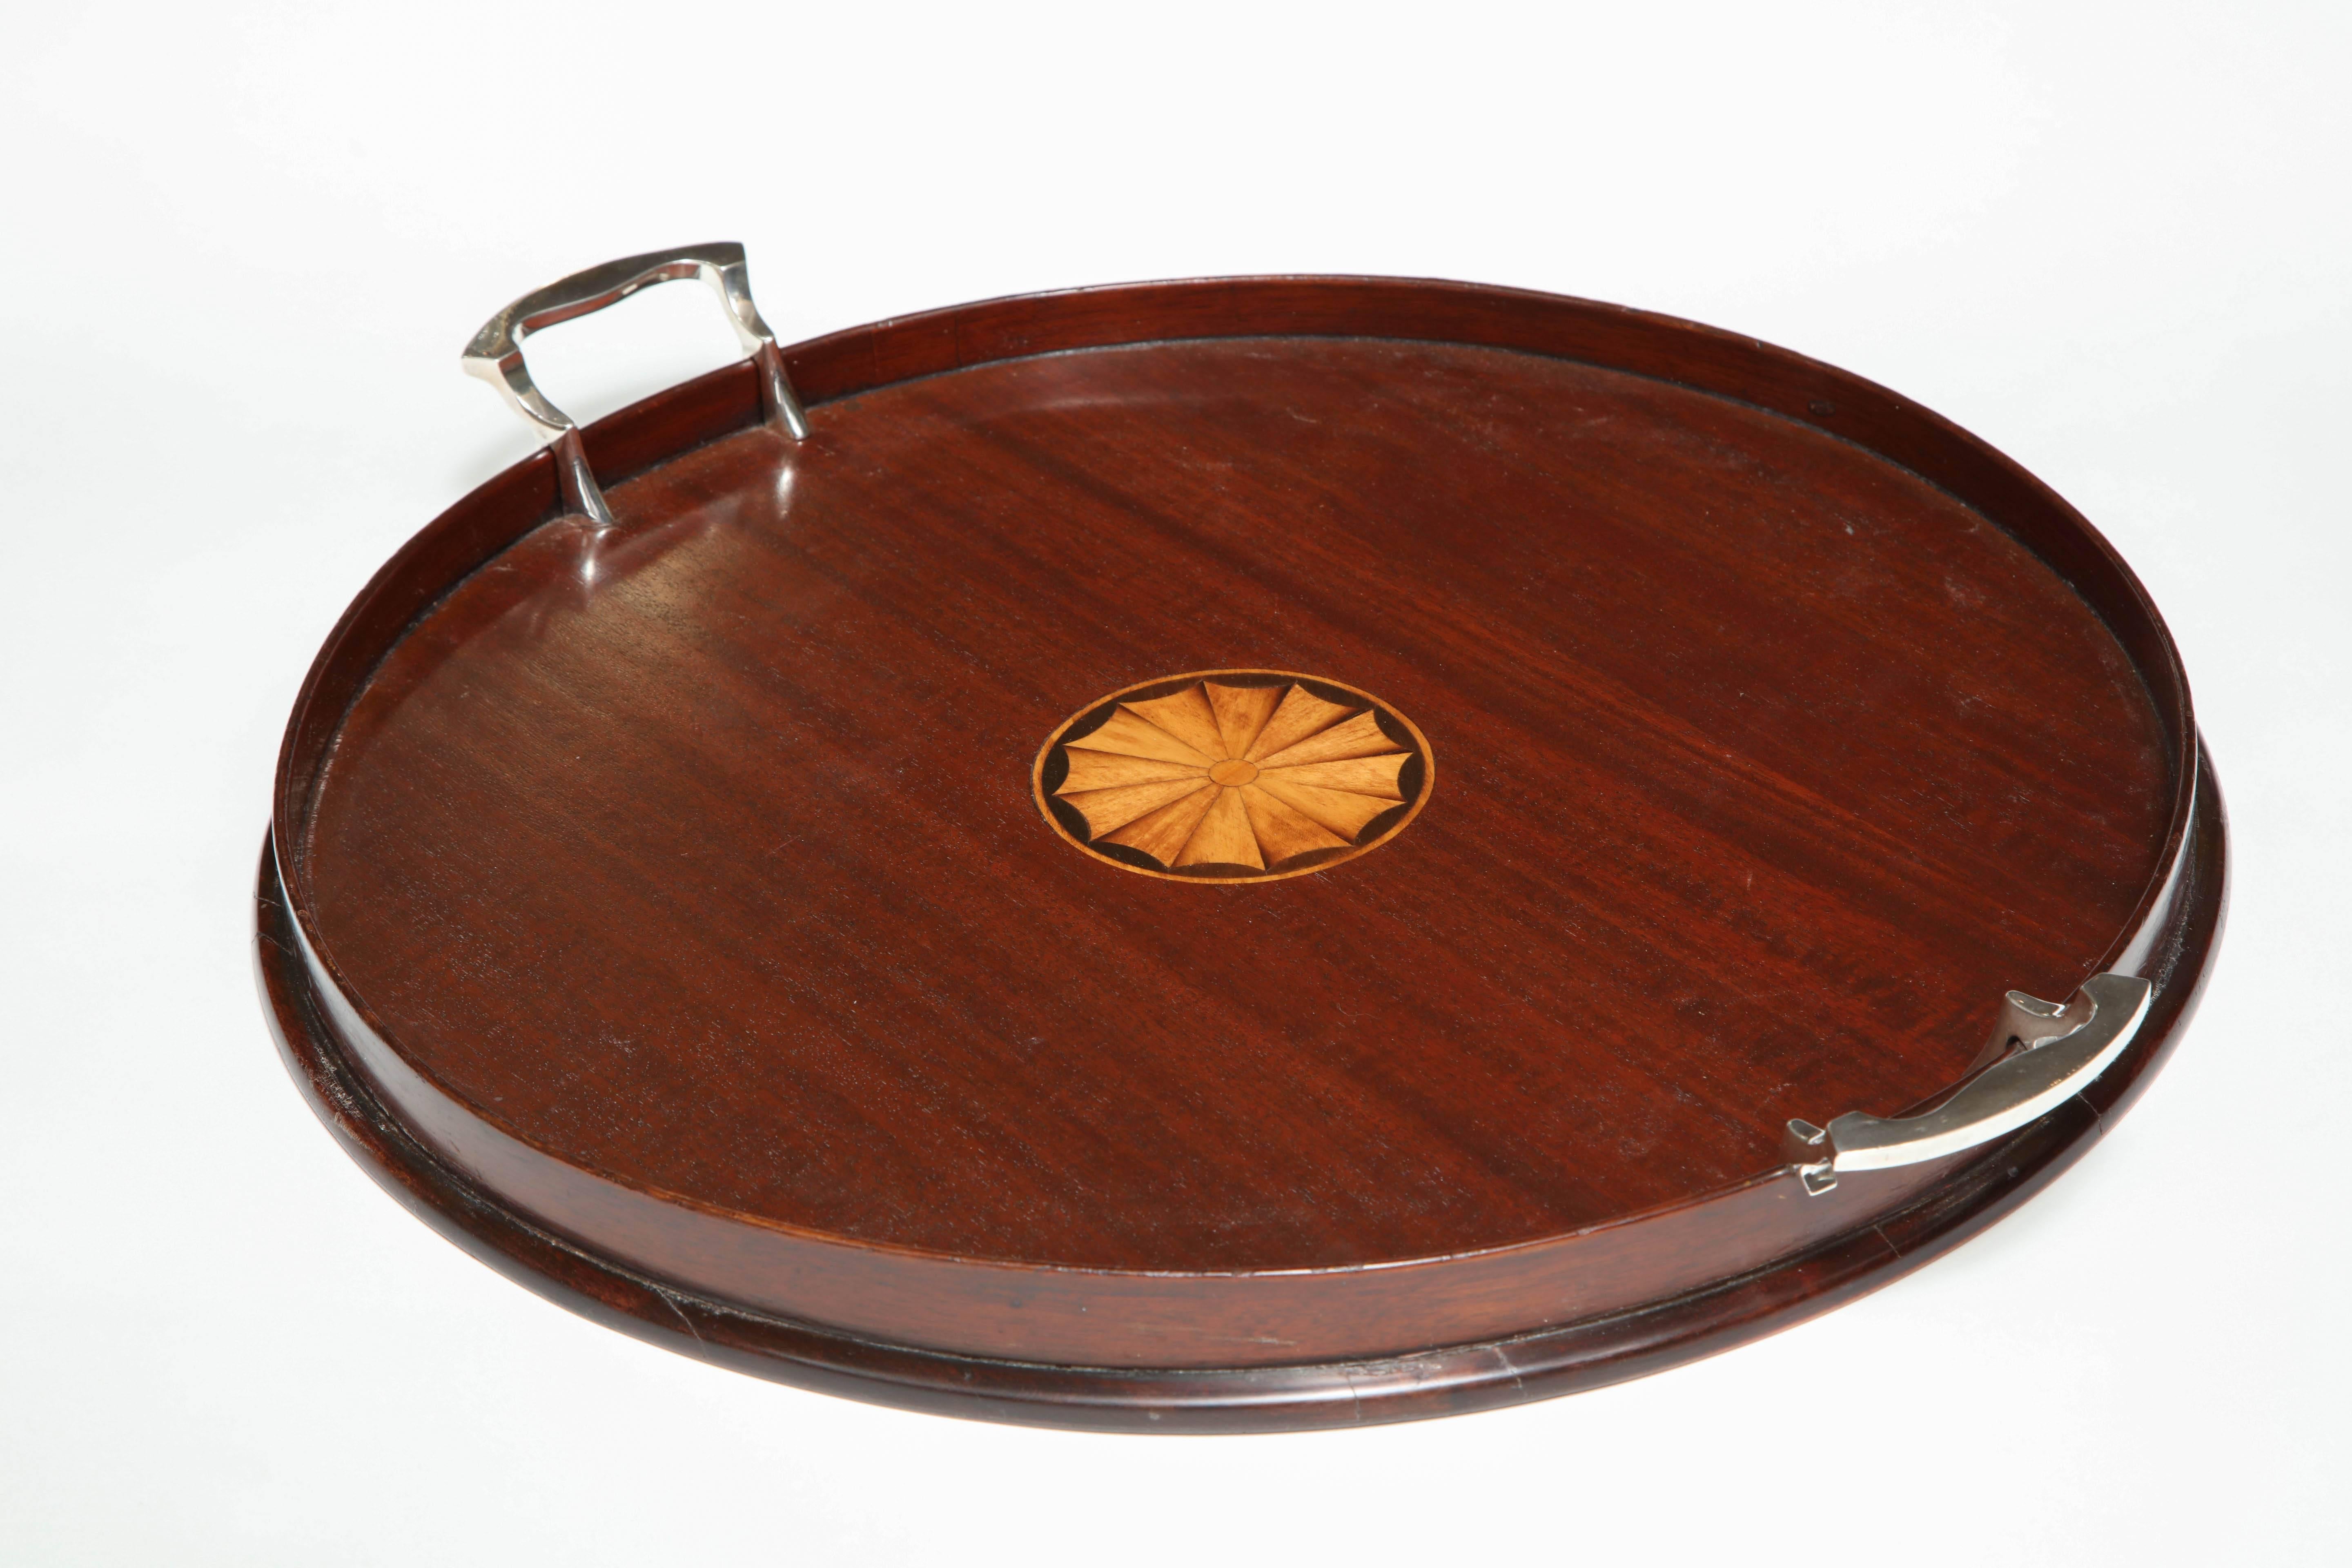 Early 20th Century Edwardian Sheraton-Style Round Wood Serving Tray with Silver Plated Handles